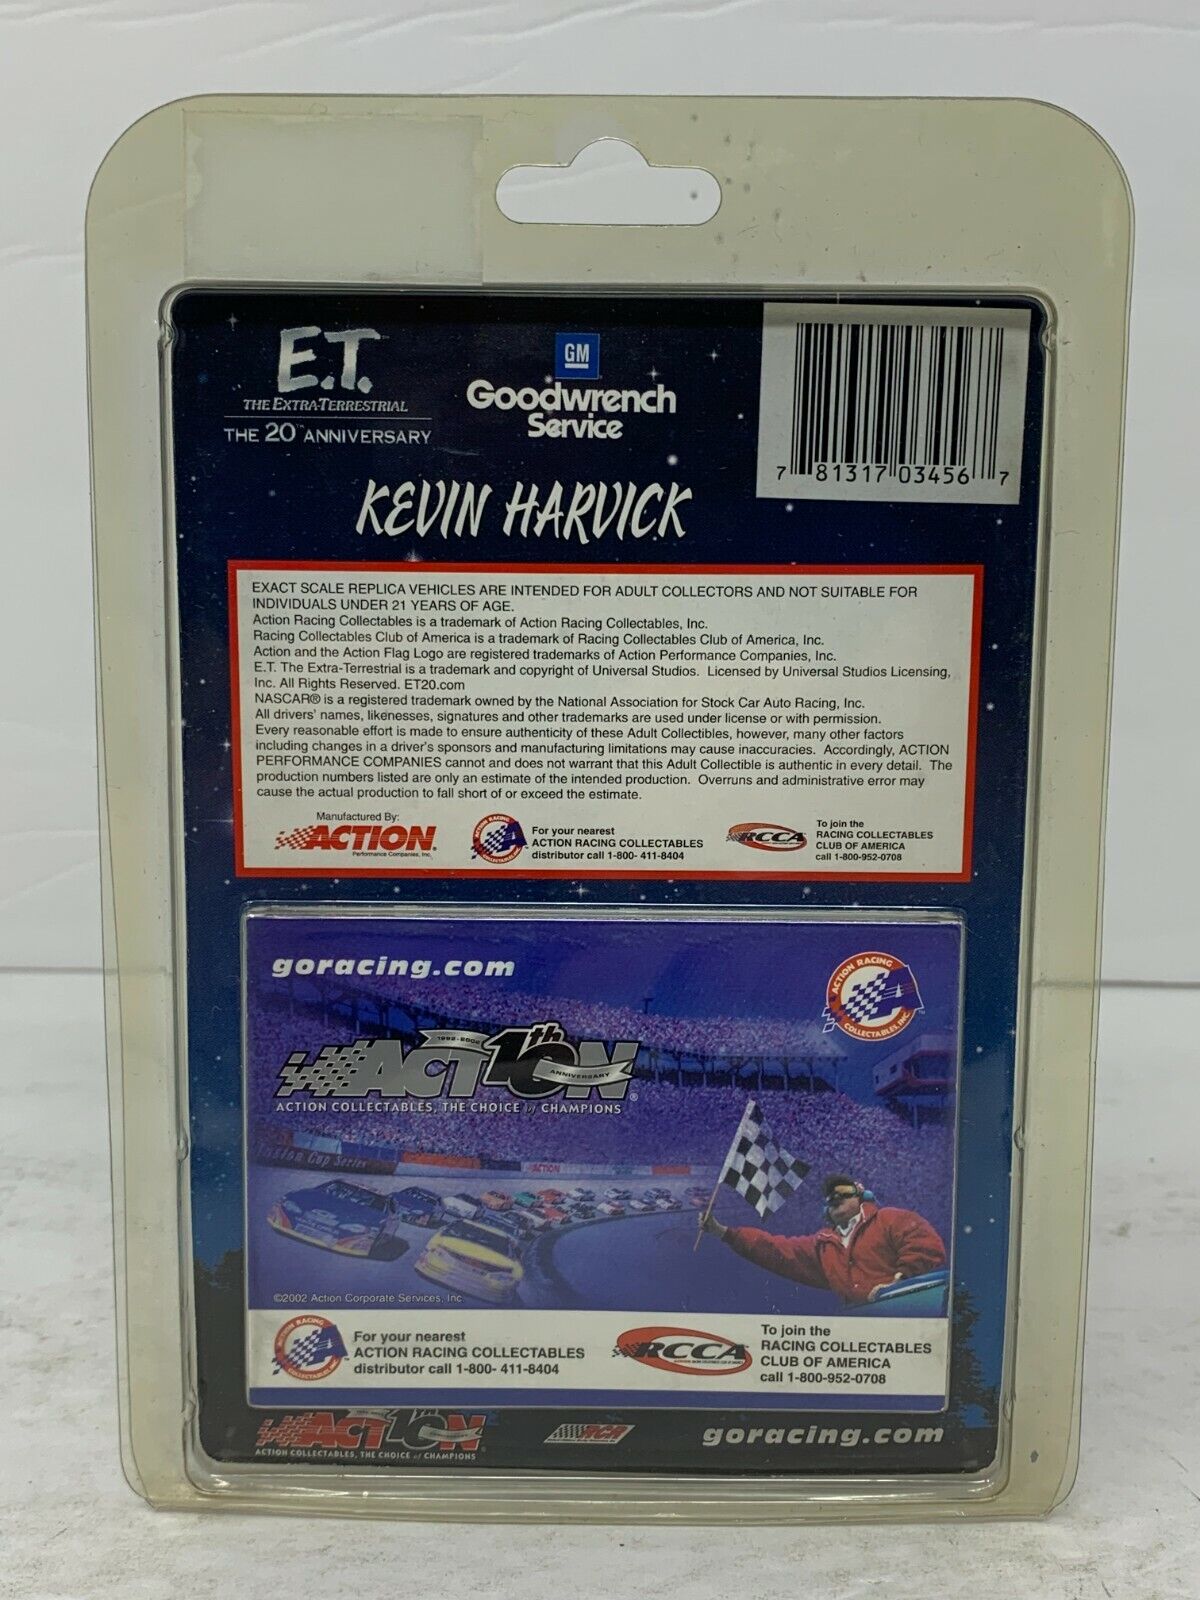 Action Nascar #29 GM Goodwrench Kevin Harvick E.T. 2002 Monte Carlo 1:64 Diecast